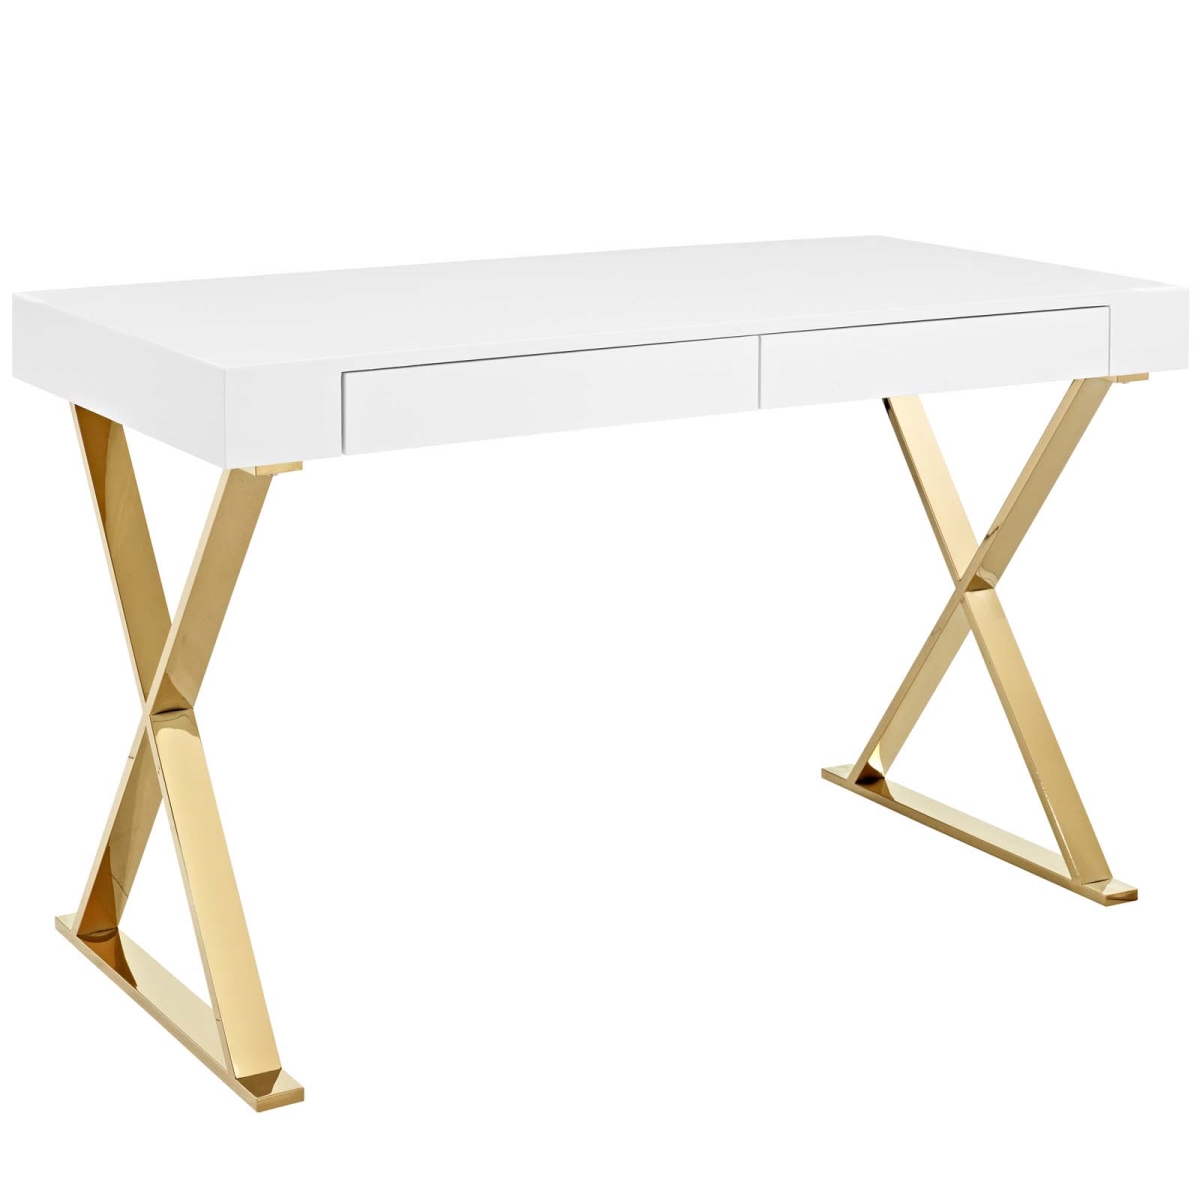 Eei-3030-whi Sector Office Desk - White Gold, 30 X 23.5 X 47 In.